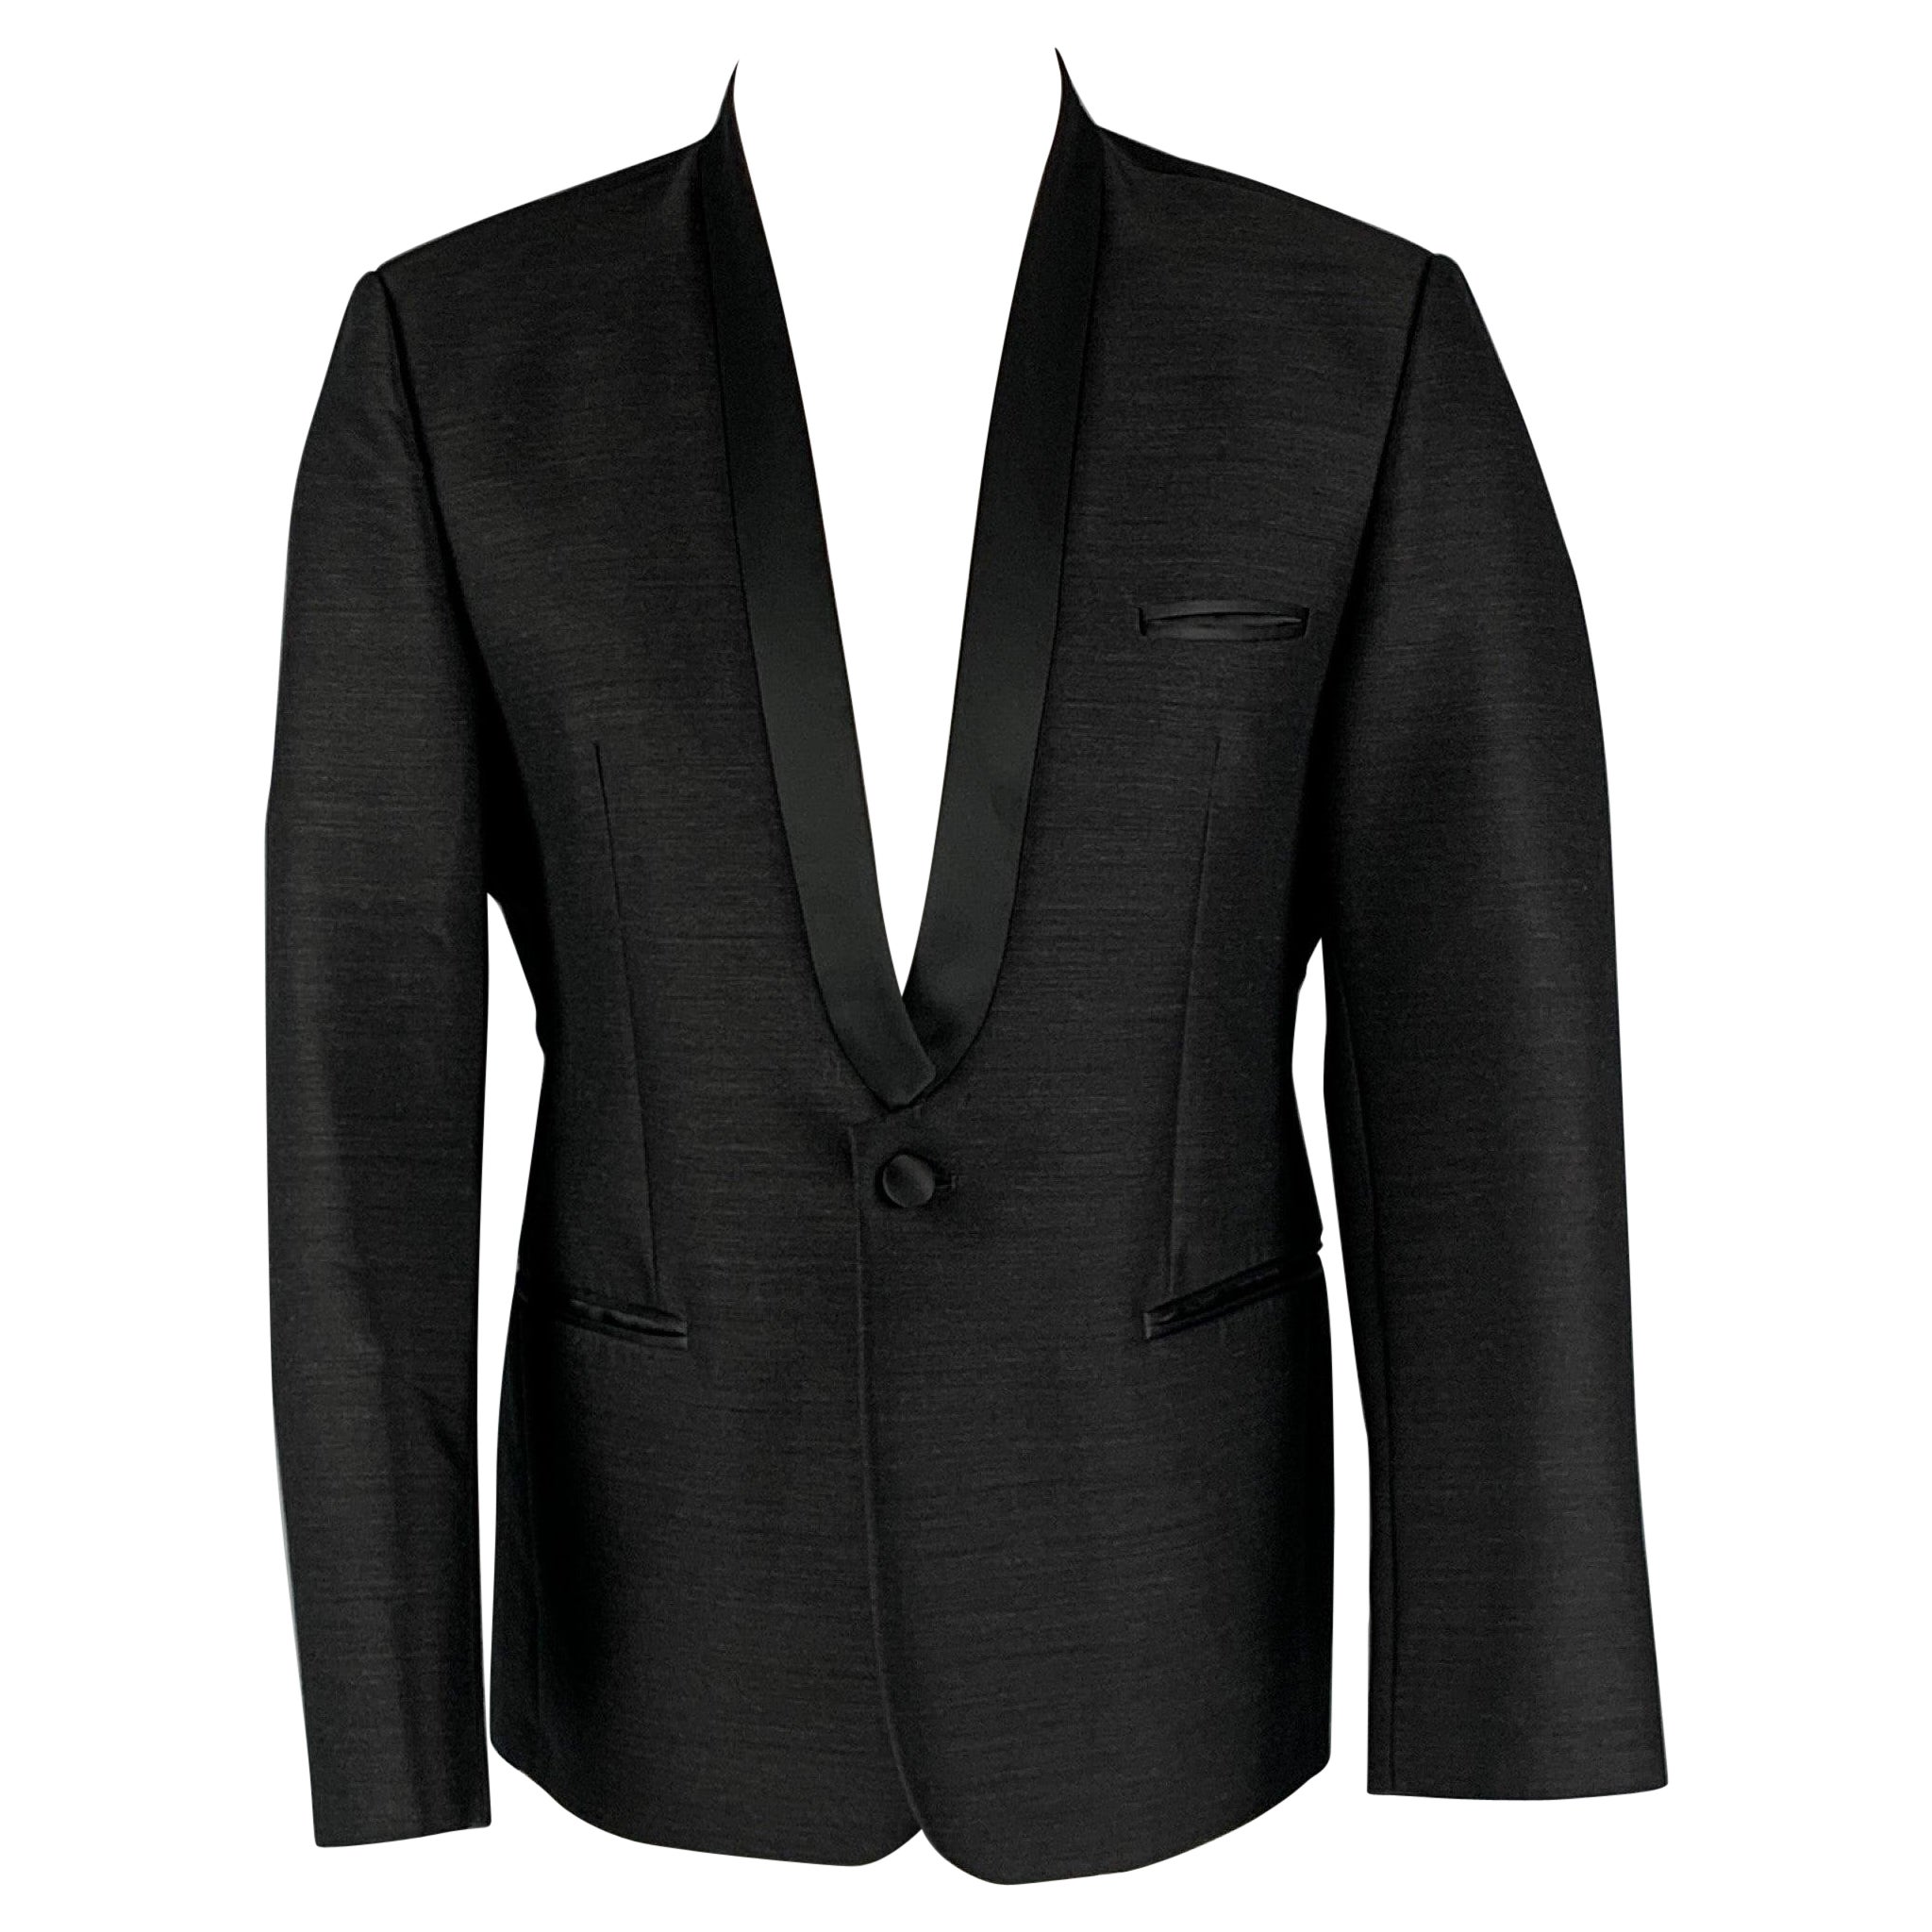 EMPORIO ARMANI Size 40 Black Solid Wool Blend Shawl Collar Sport Coat For Sale